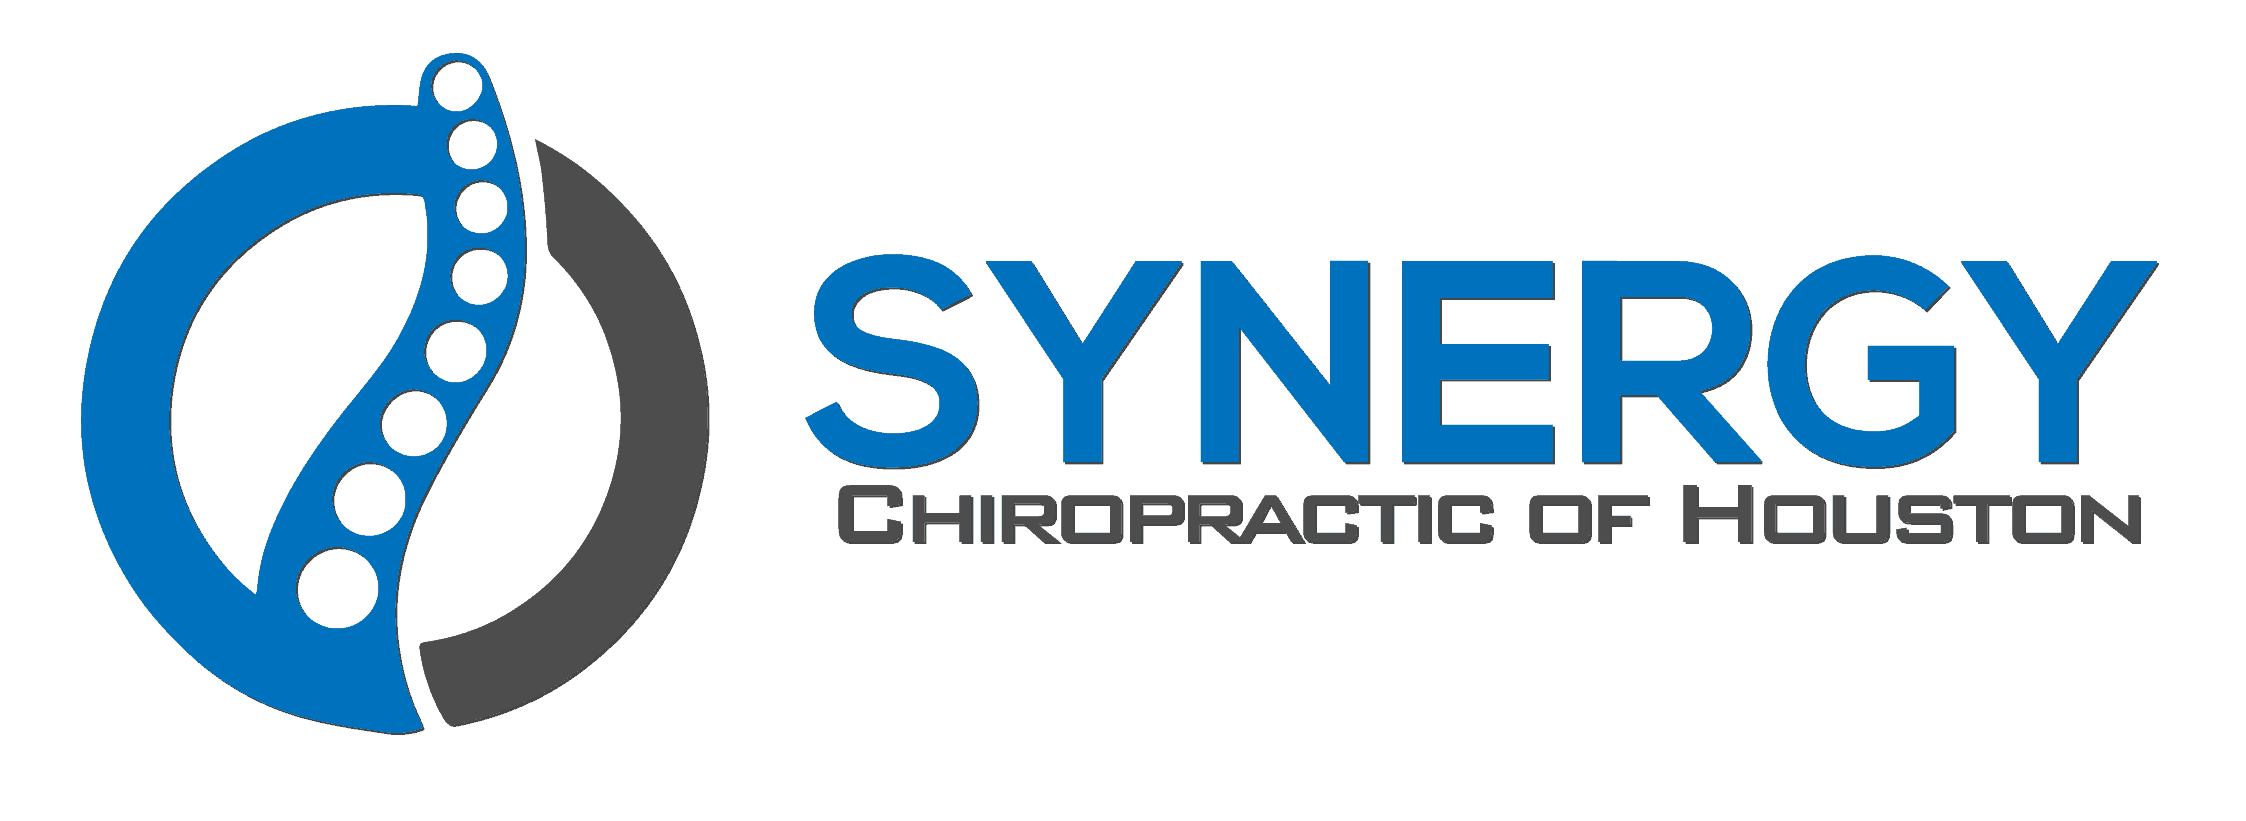 Synergy Chiropractic of Houston – The Growth Continues